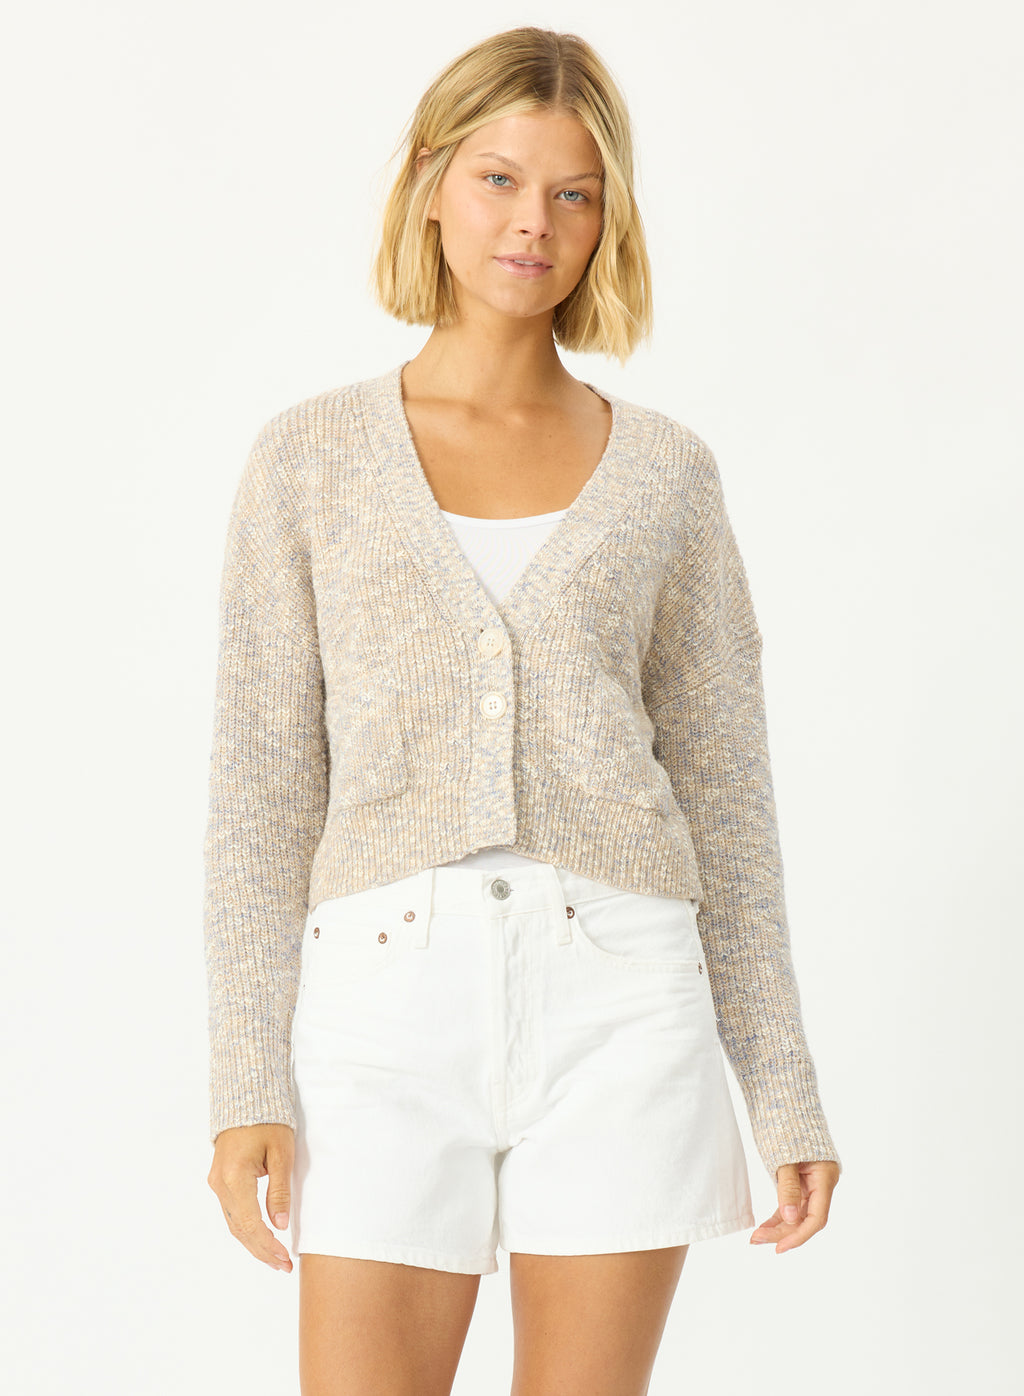 Stitches + Stripes Ridley Cardigan in Grain Combo